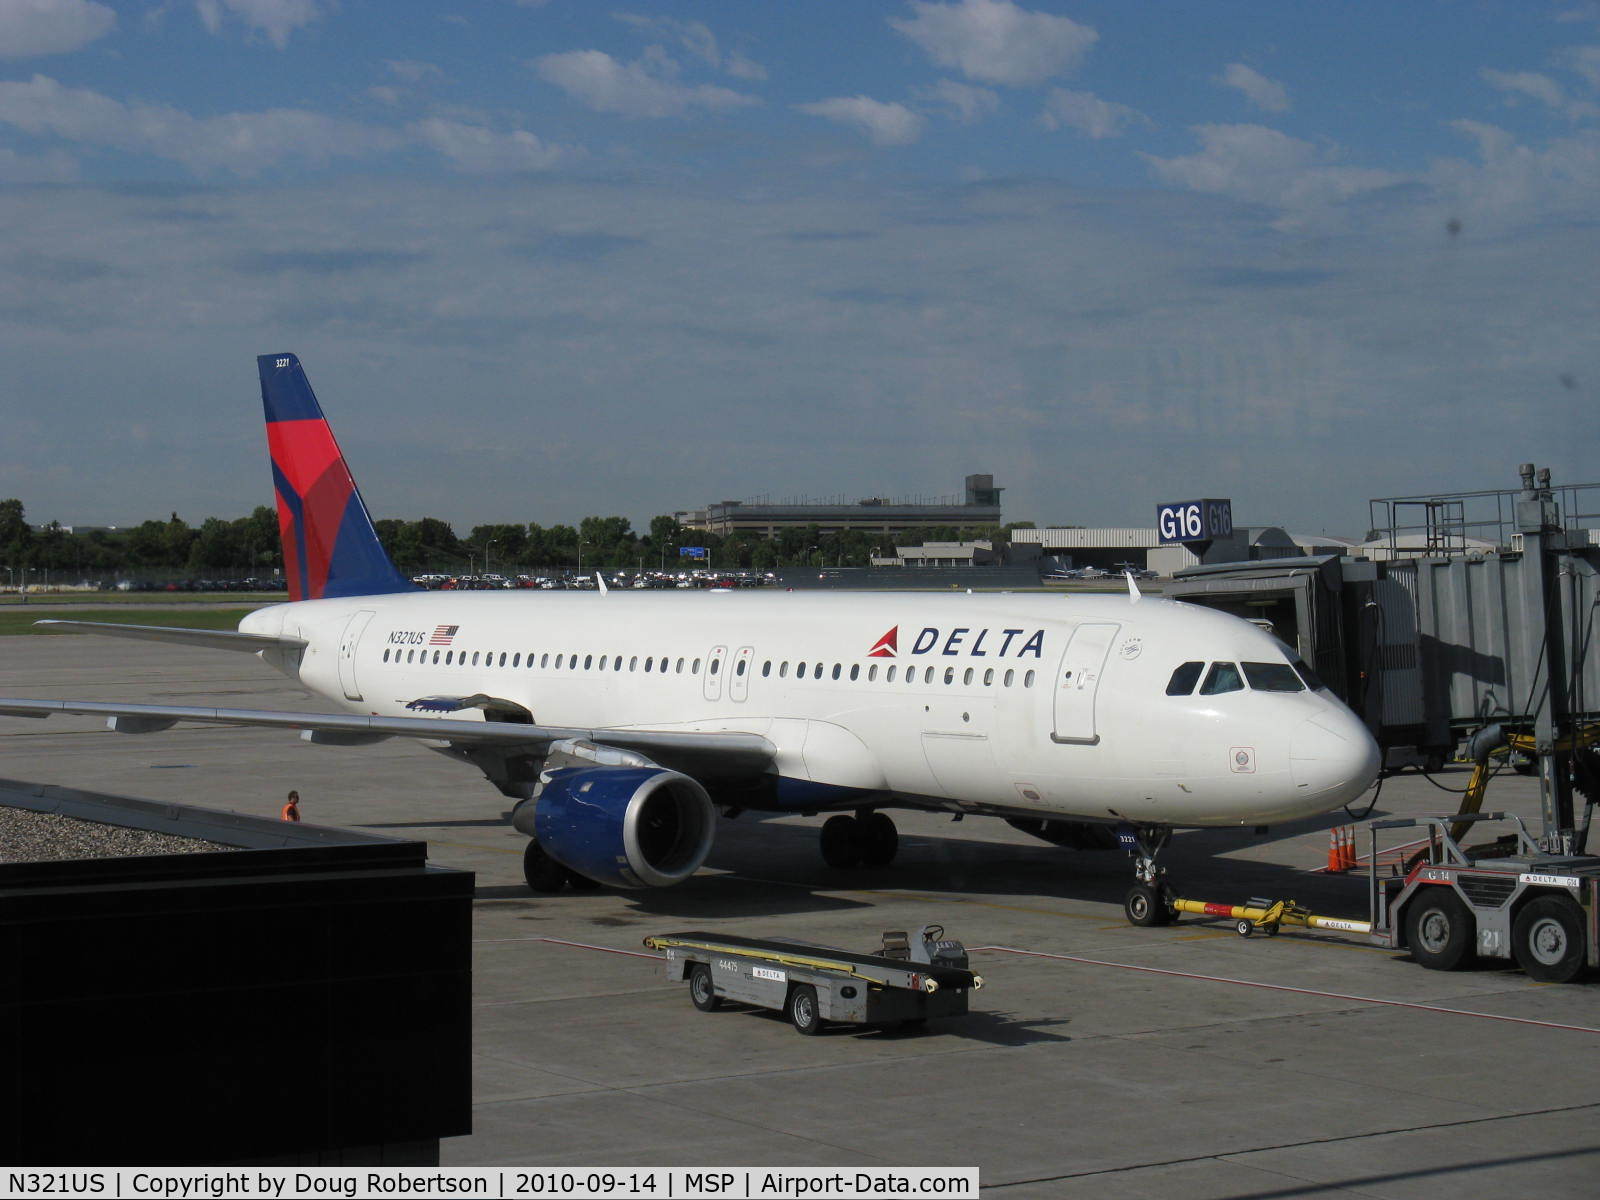 N321US, 1992 Airbus A320-211 C/N 262, 1992 Airbus A320-211 of Delta Airlines, two CFM Int'l CFM56-A41 Turbofans 25,000 lb st each